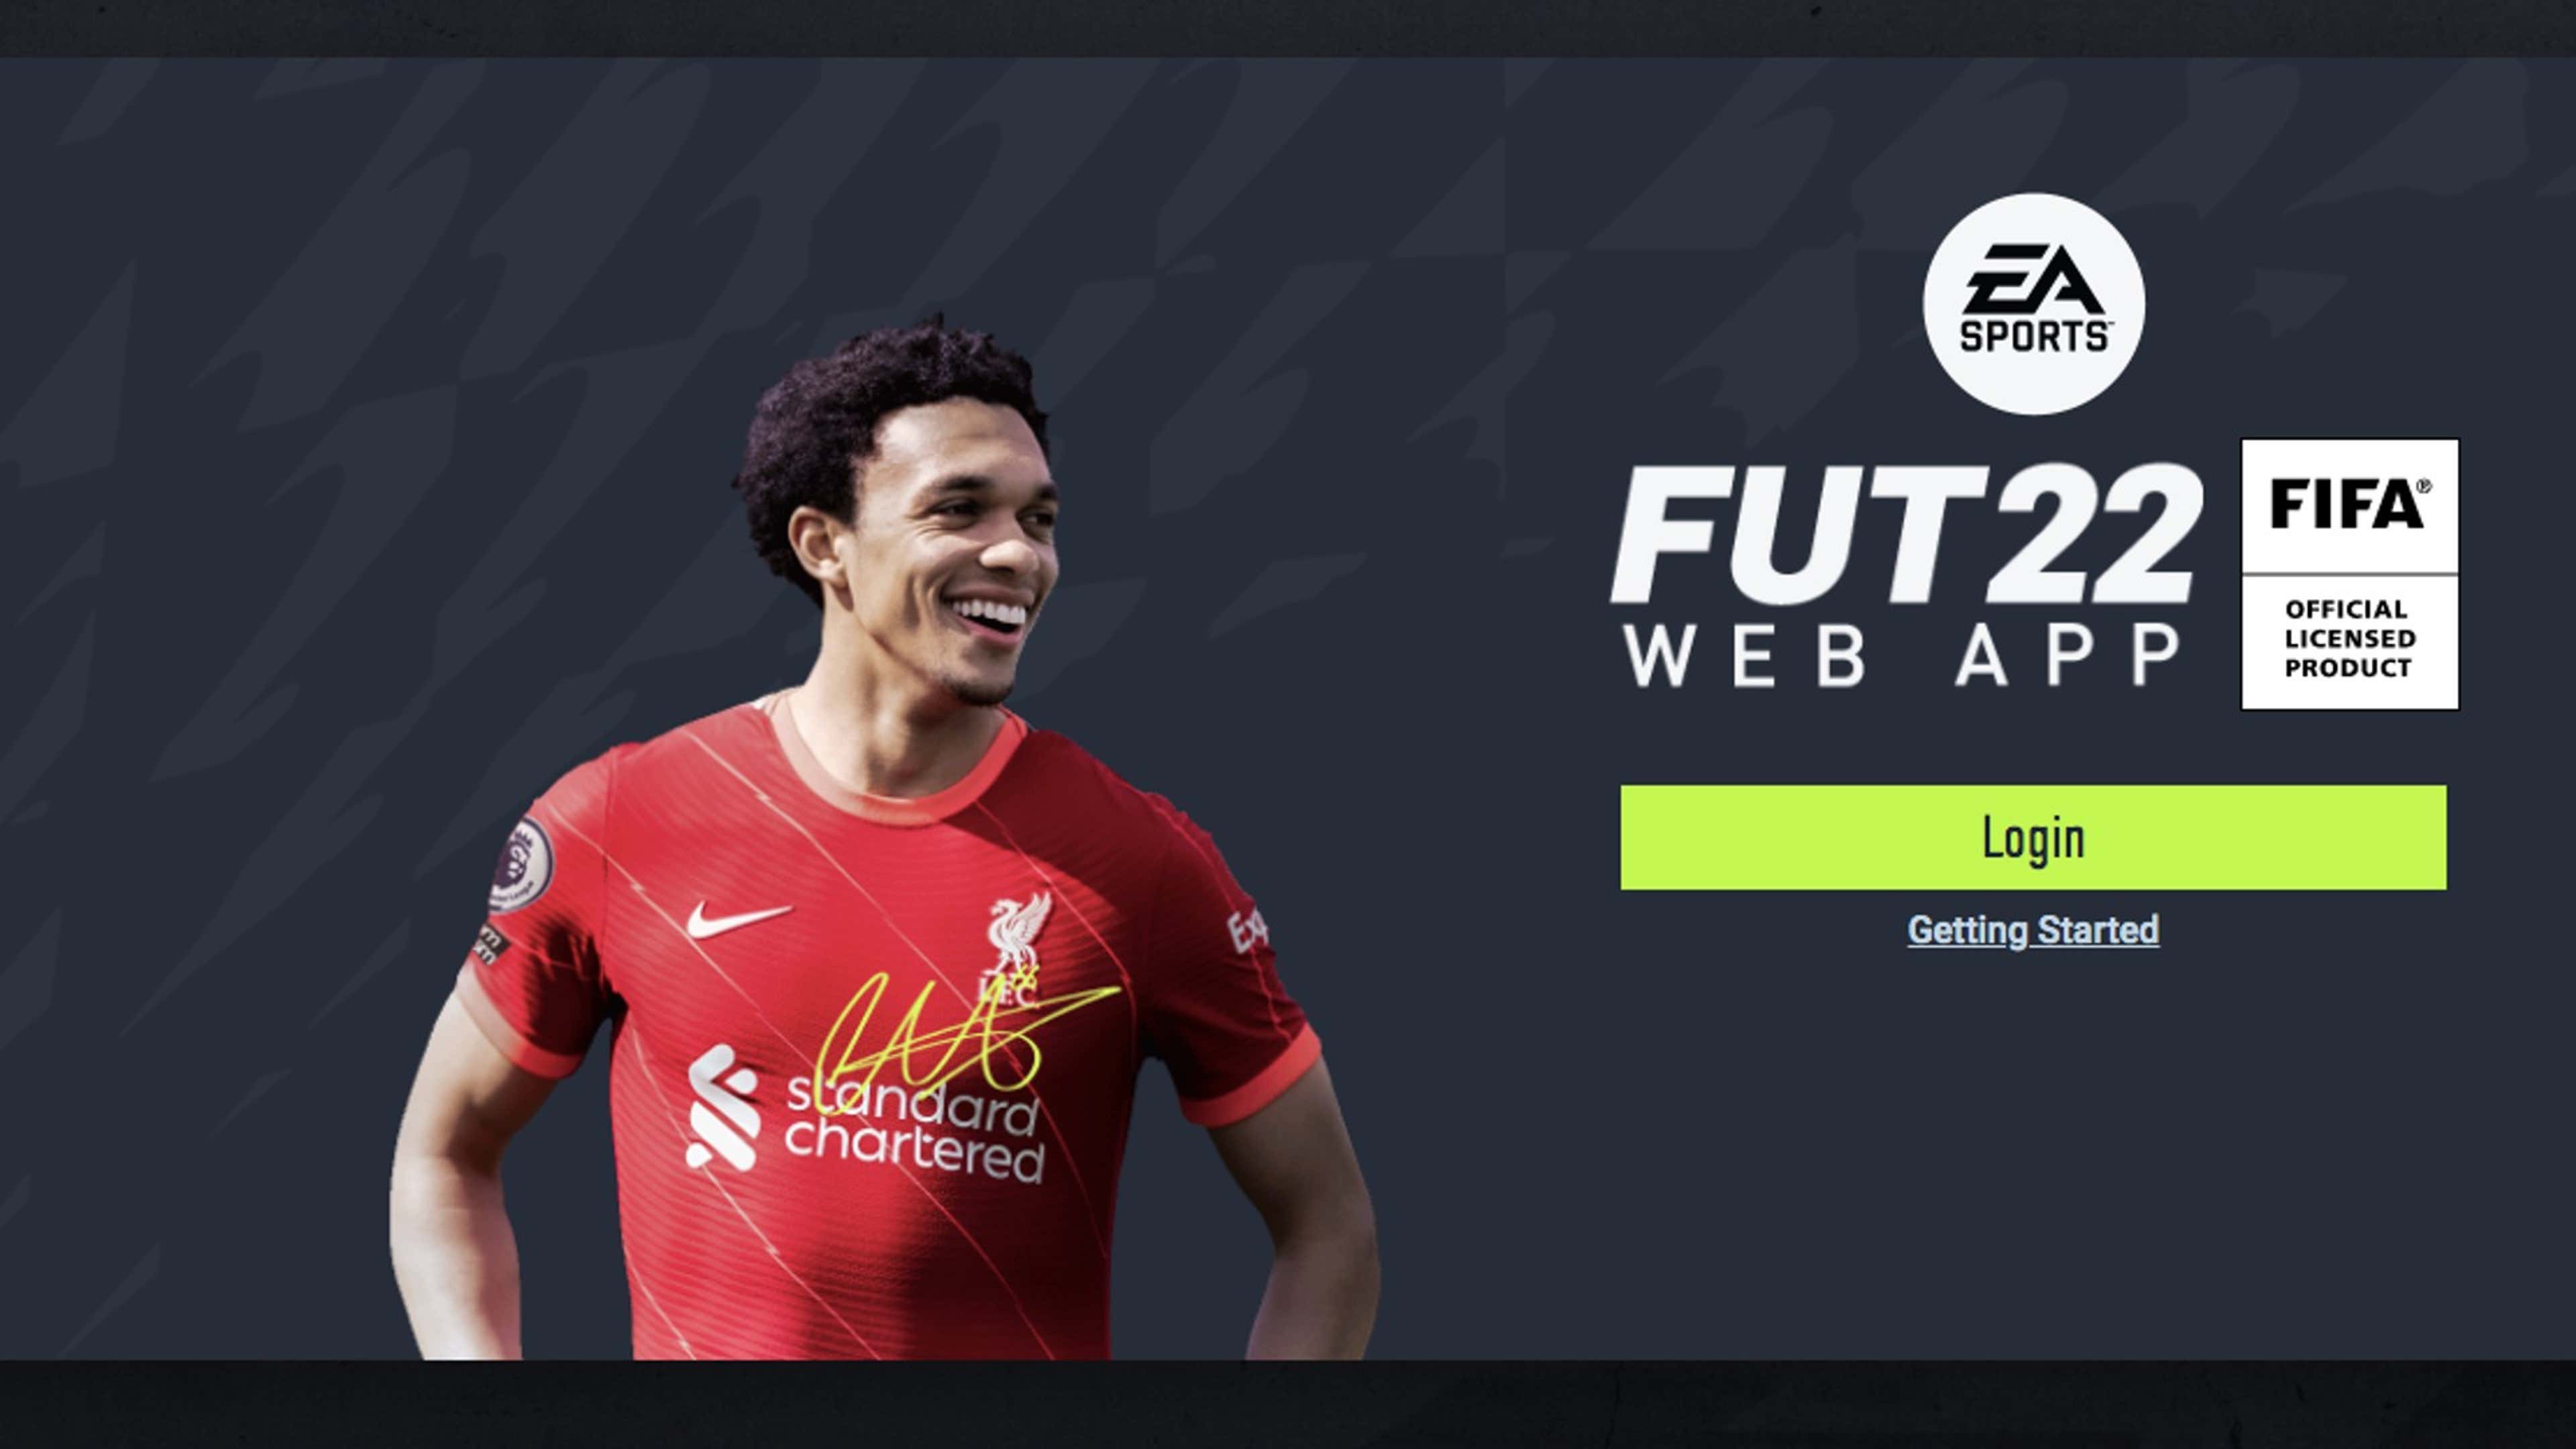 FIFA 23 Companion App: How to login expected steps